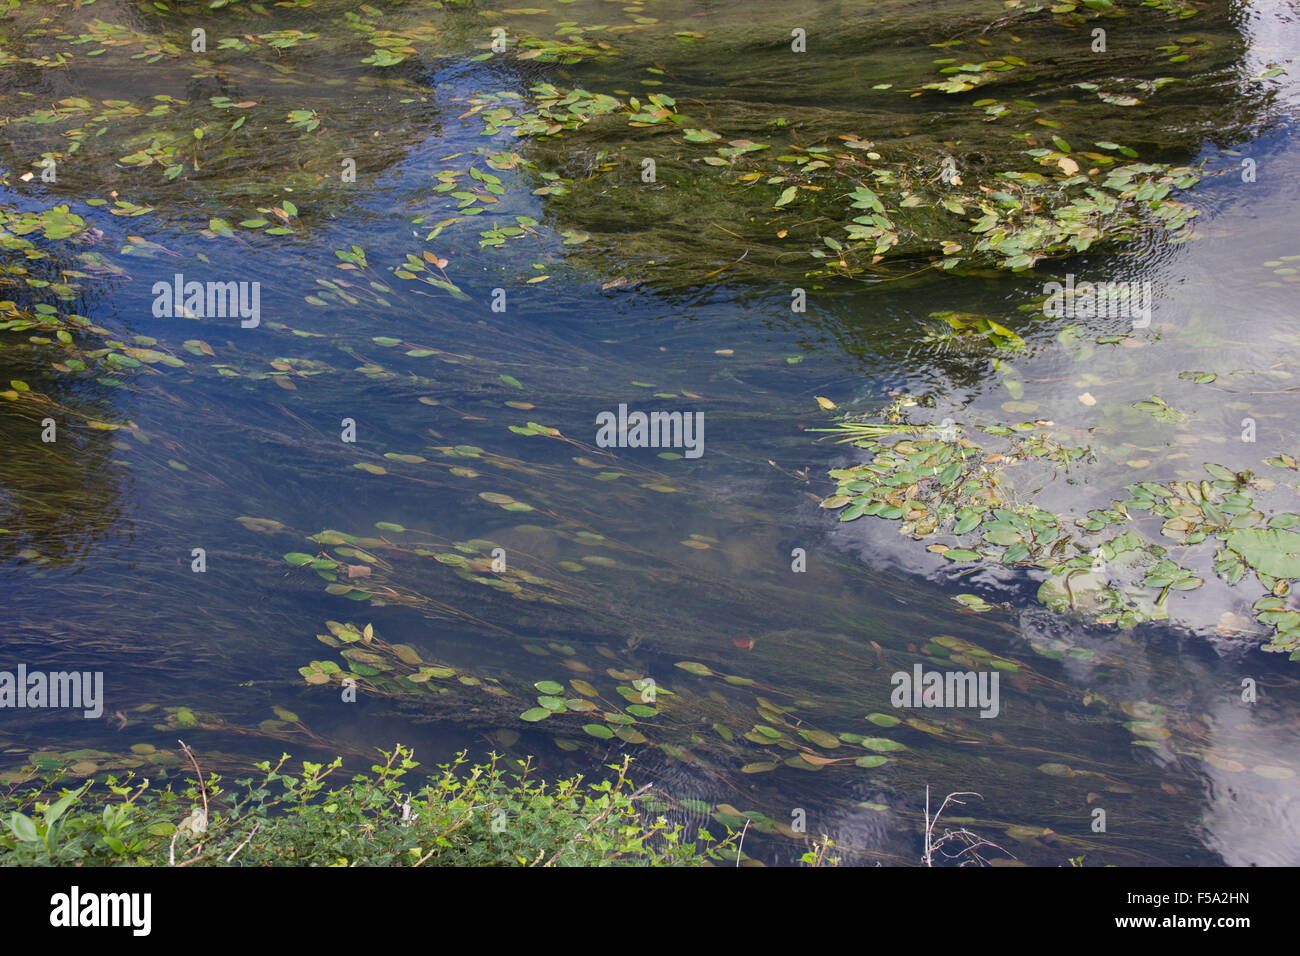 The River Yevre at Mehun sur Yevre, Central France Stock Photo